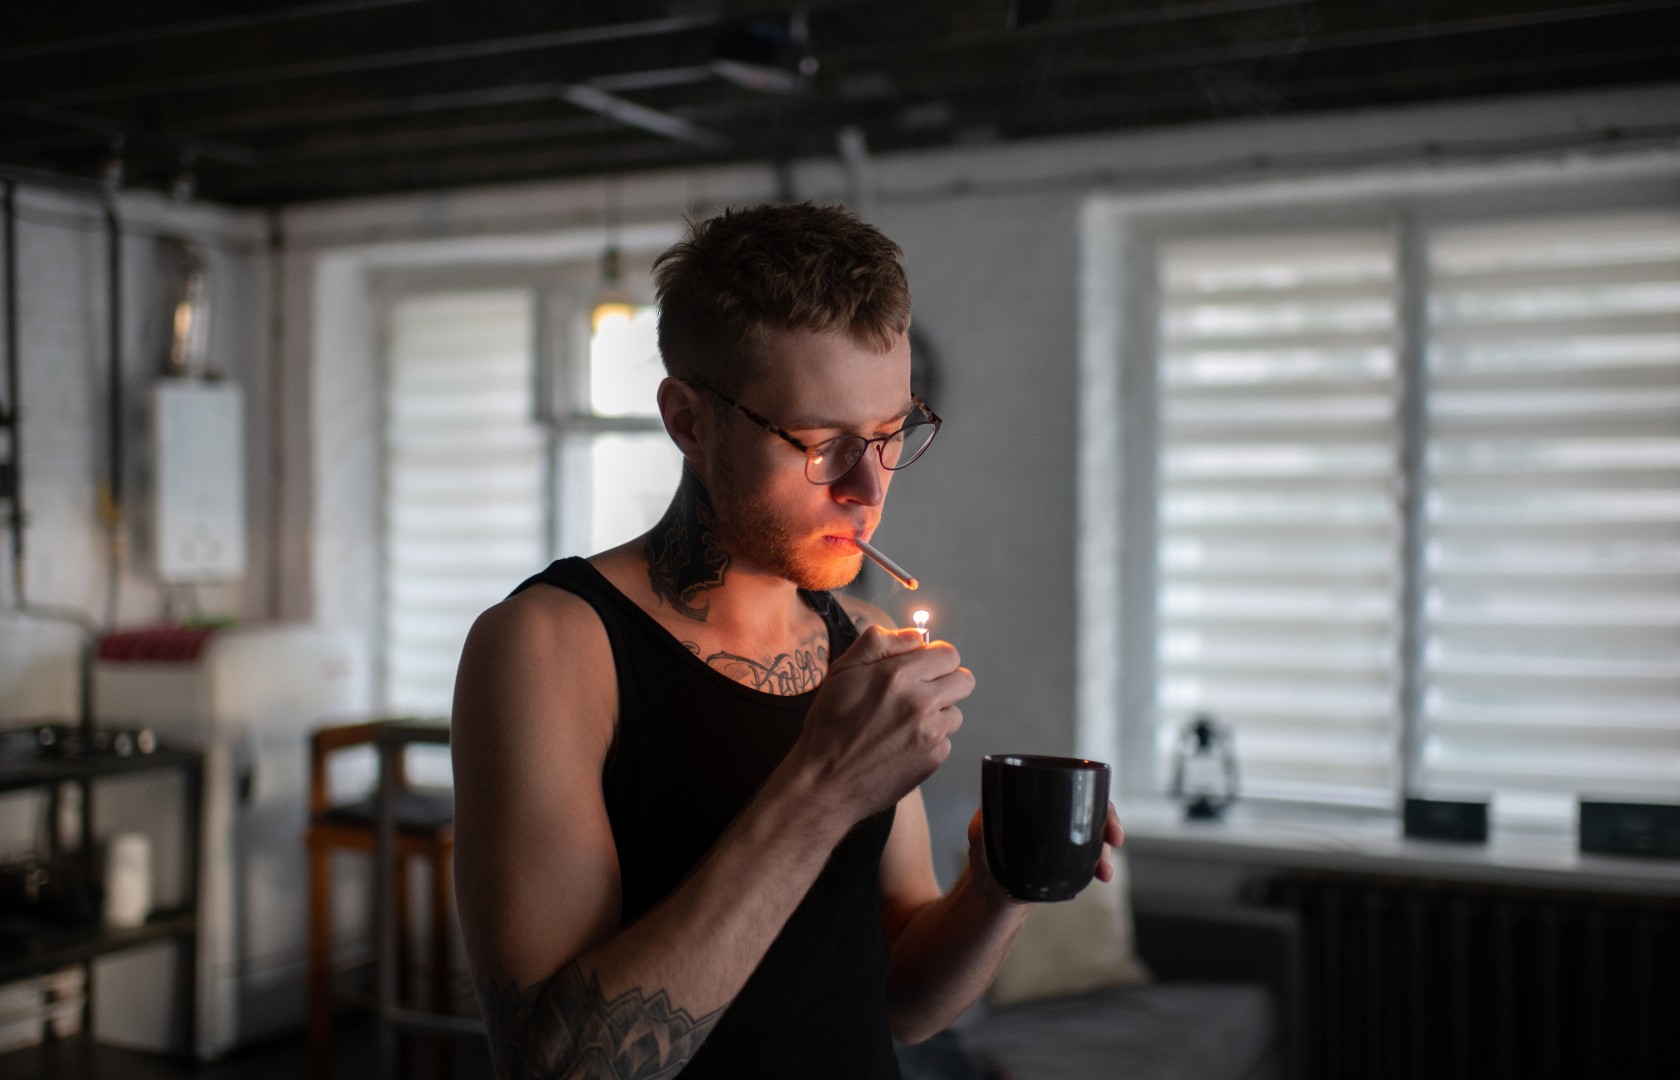 You are currently viewing “Wake and Bake” – Pros & Cons of Smoking Weed in the Morning